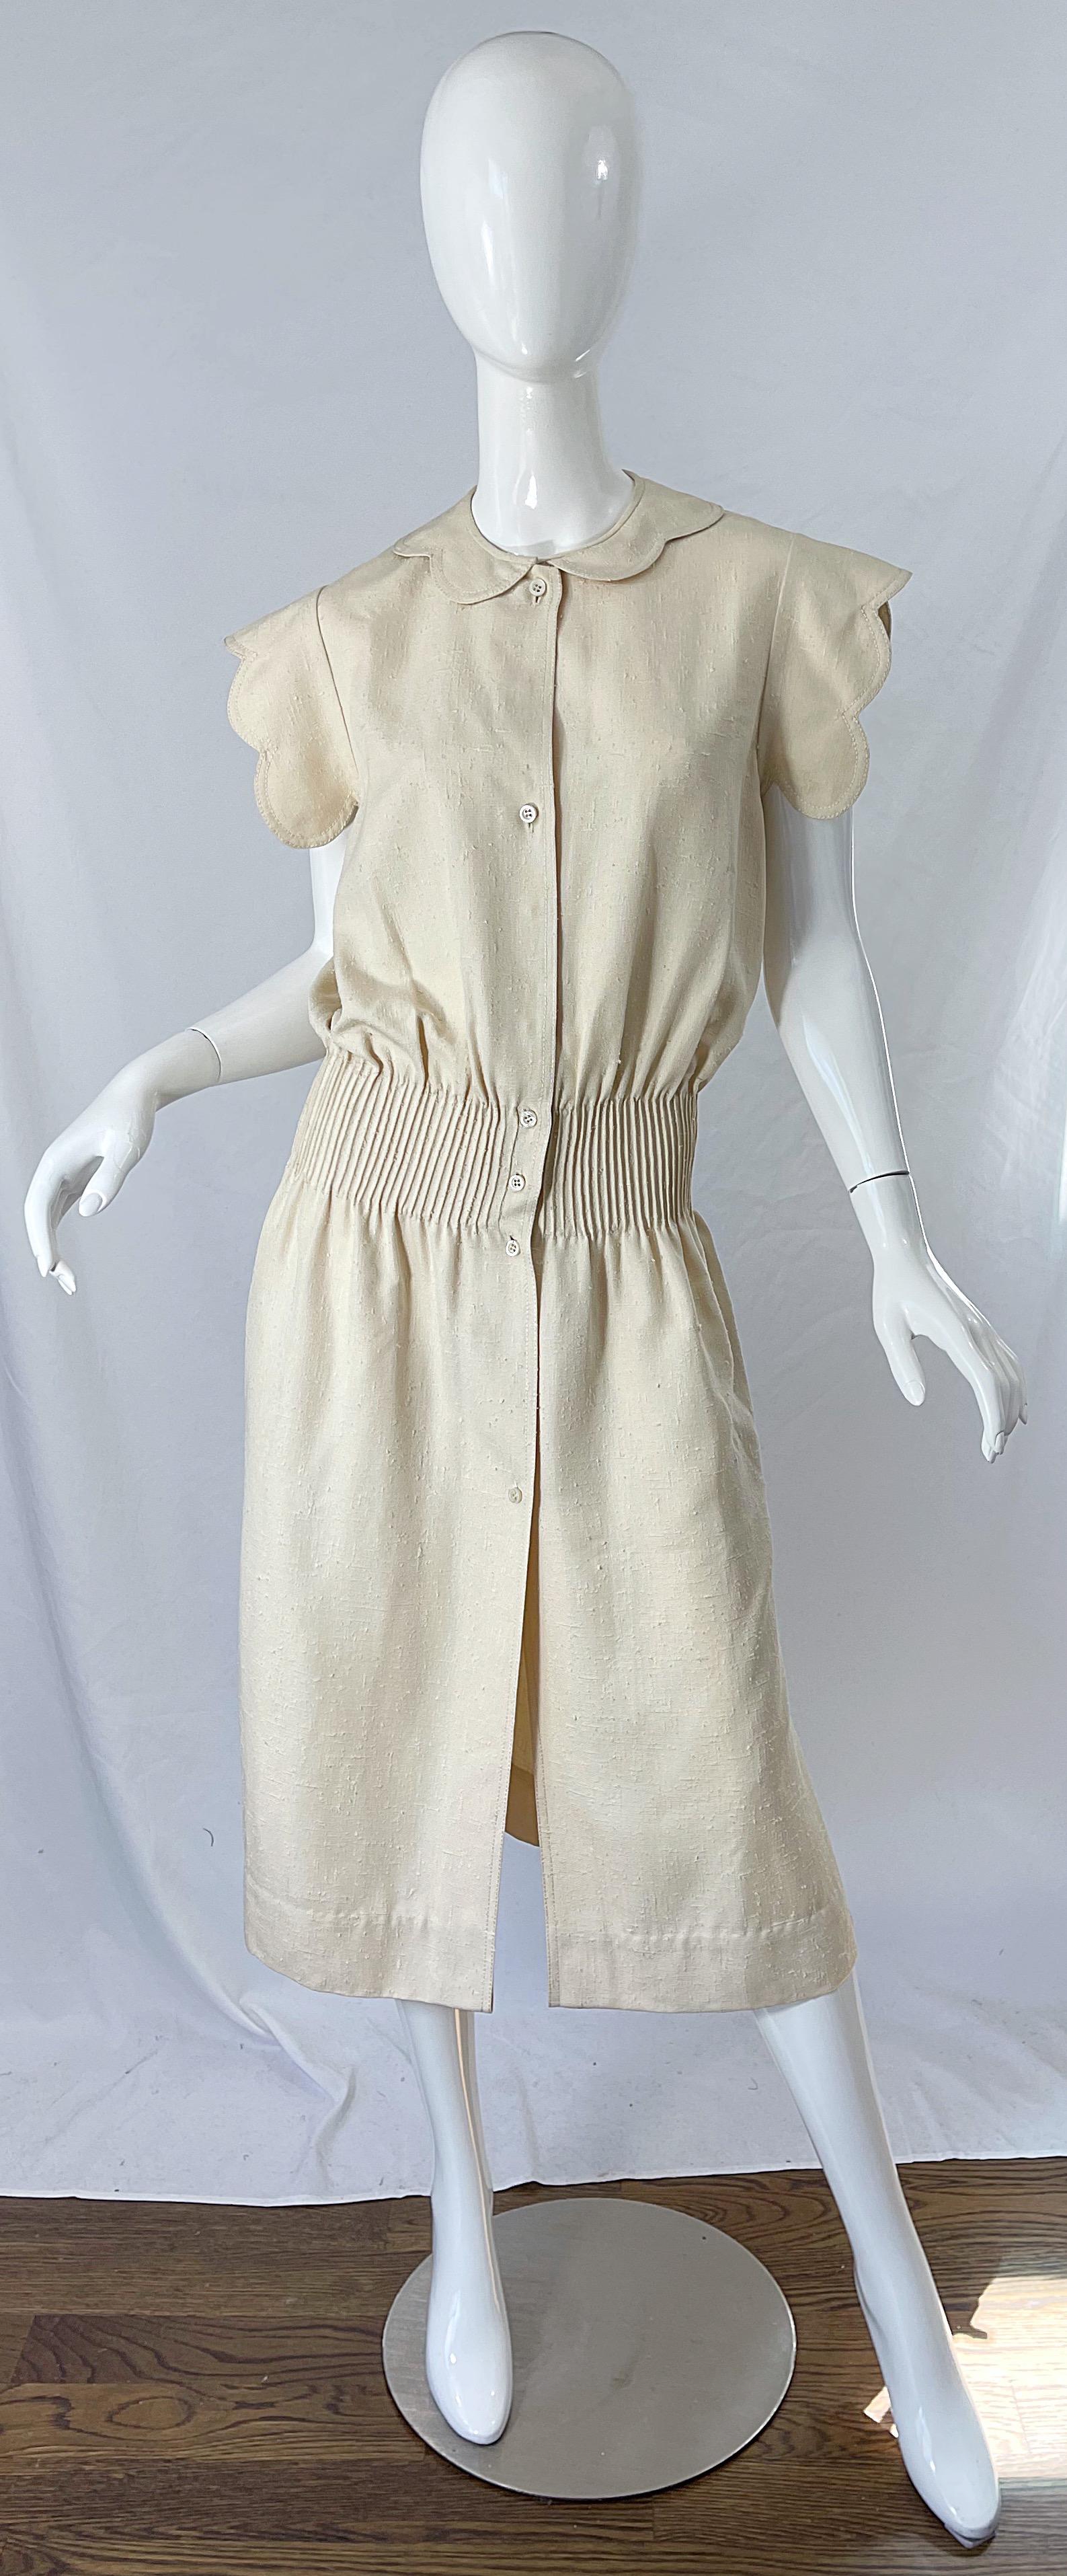 Rare early 1960s JAMES GALANOS for Bonwit Teller ivory Irish linen Avant Garde dress ! This gem is seriously a musuem worthy couture piece from Galanos' early work. Couture quality, with the majority of the construction completed by hand. Buttons up